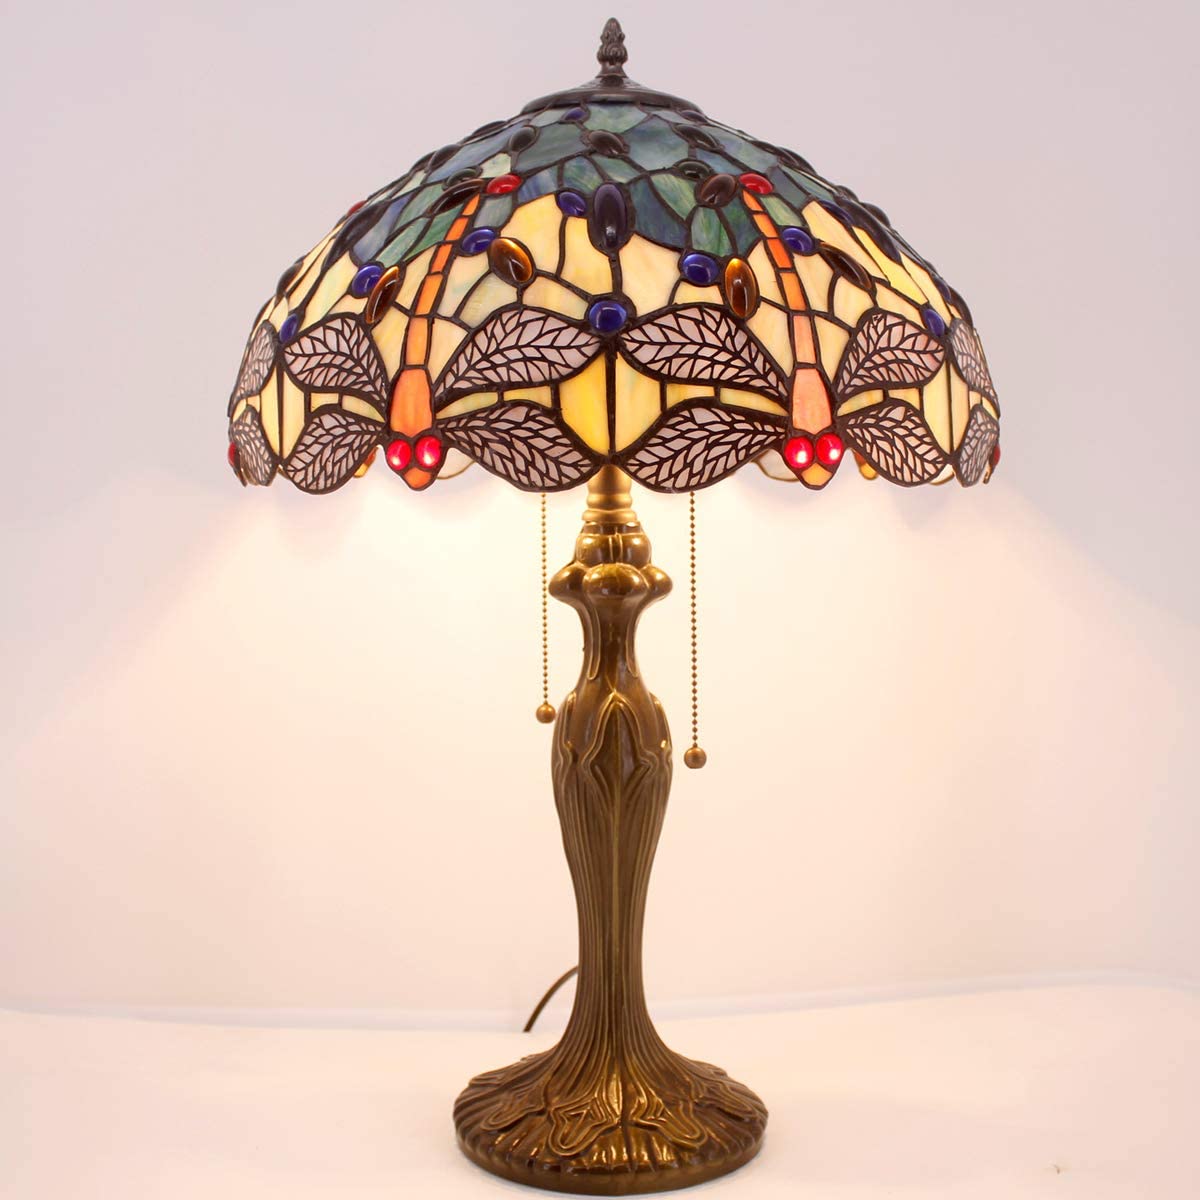 GEDUBIUBOO  Lamp Stained Glass Bedside Table Lamp Navy Blue Yellow Turquoise Dragonfly 16X16X24 Inch Desk Light Metal Base Decor Bedroom Living Room  Office S128 Series